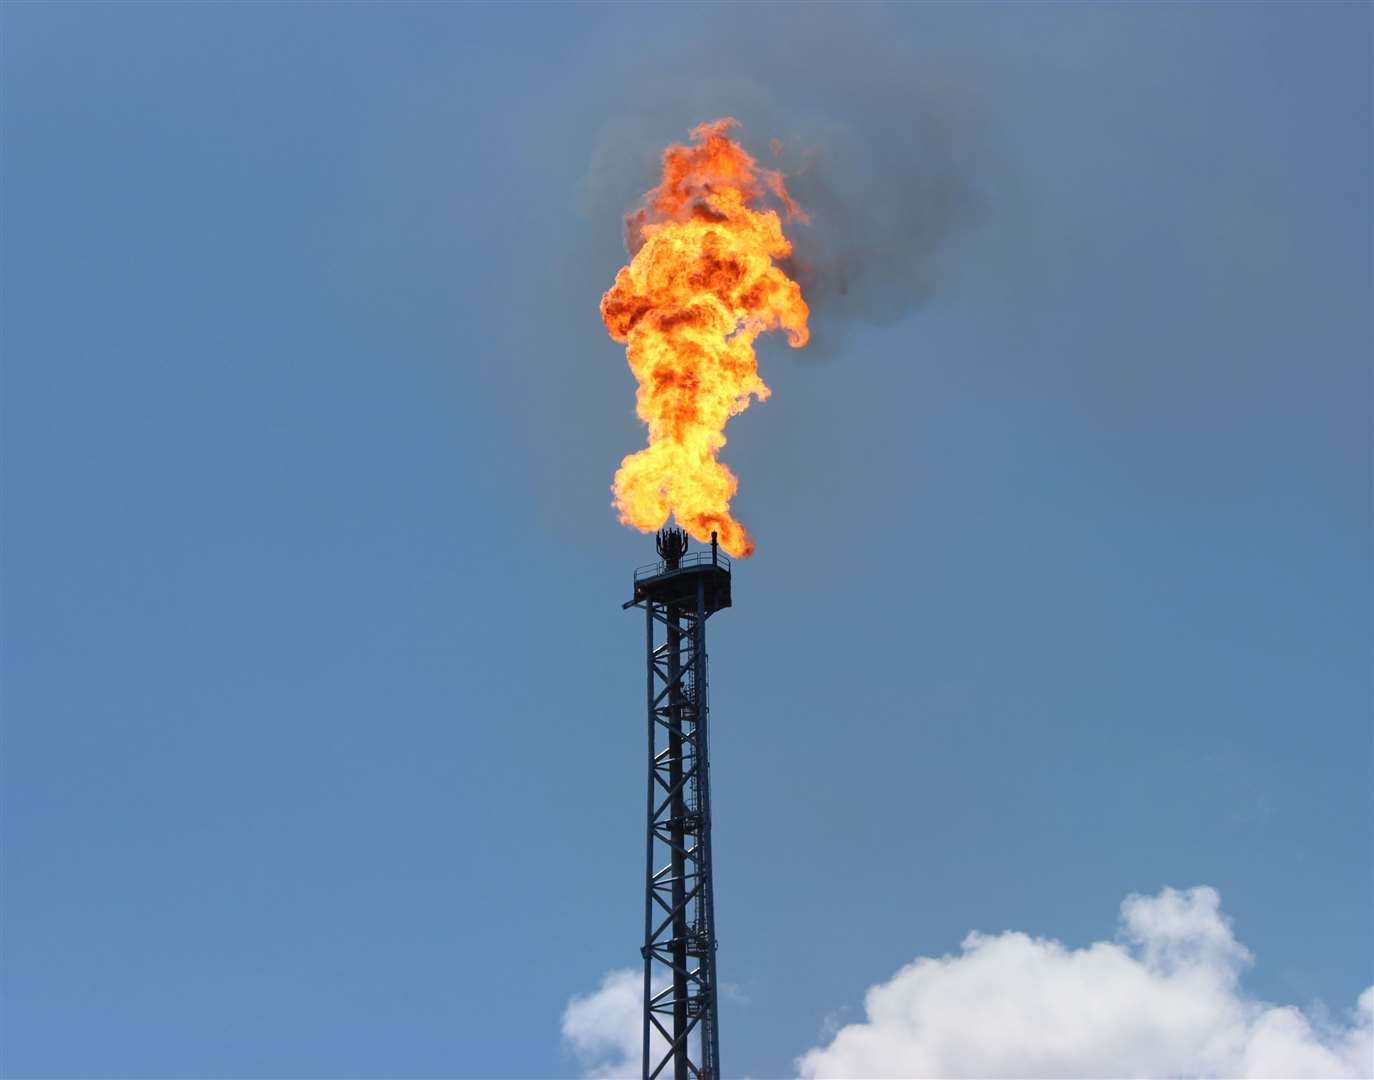 Any predictions over oil and gas have a tendency to quickly go up in smoke.